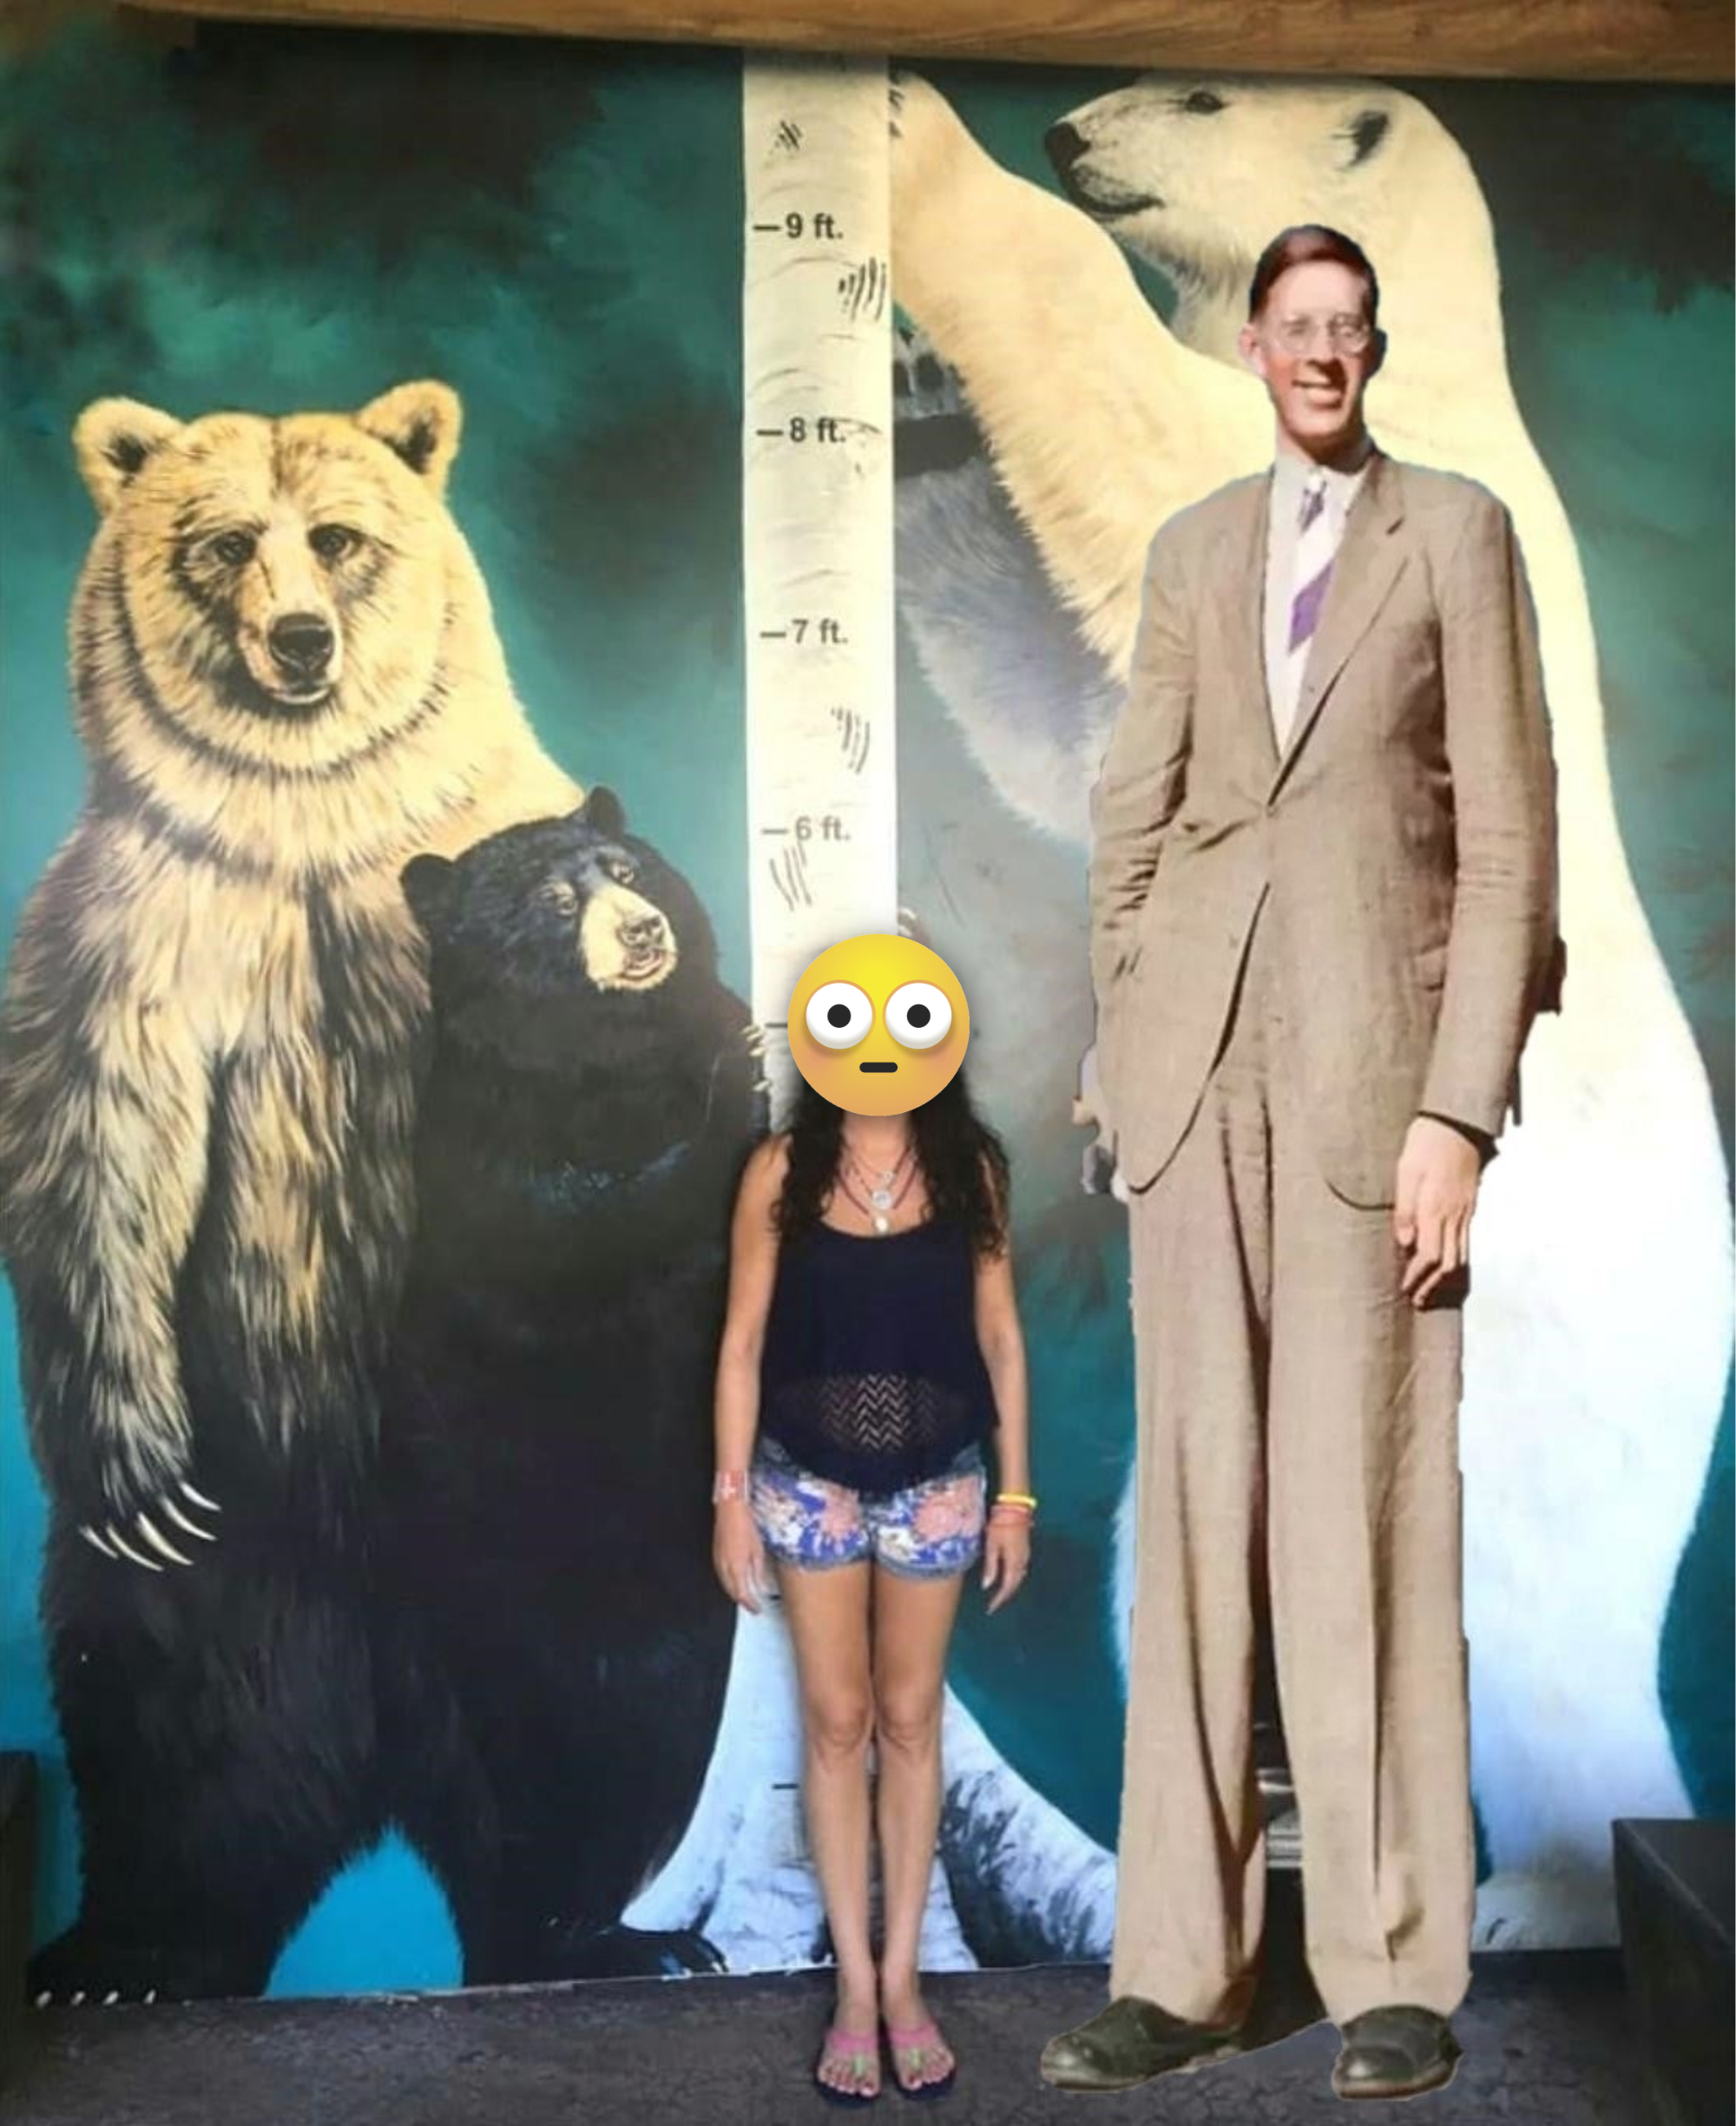 Robert Wadlow superimposed against the wall and woman with bears